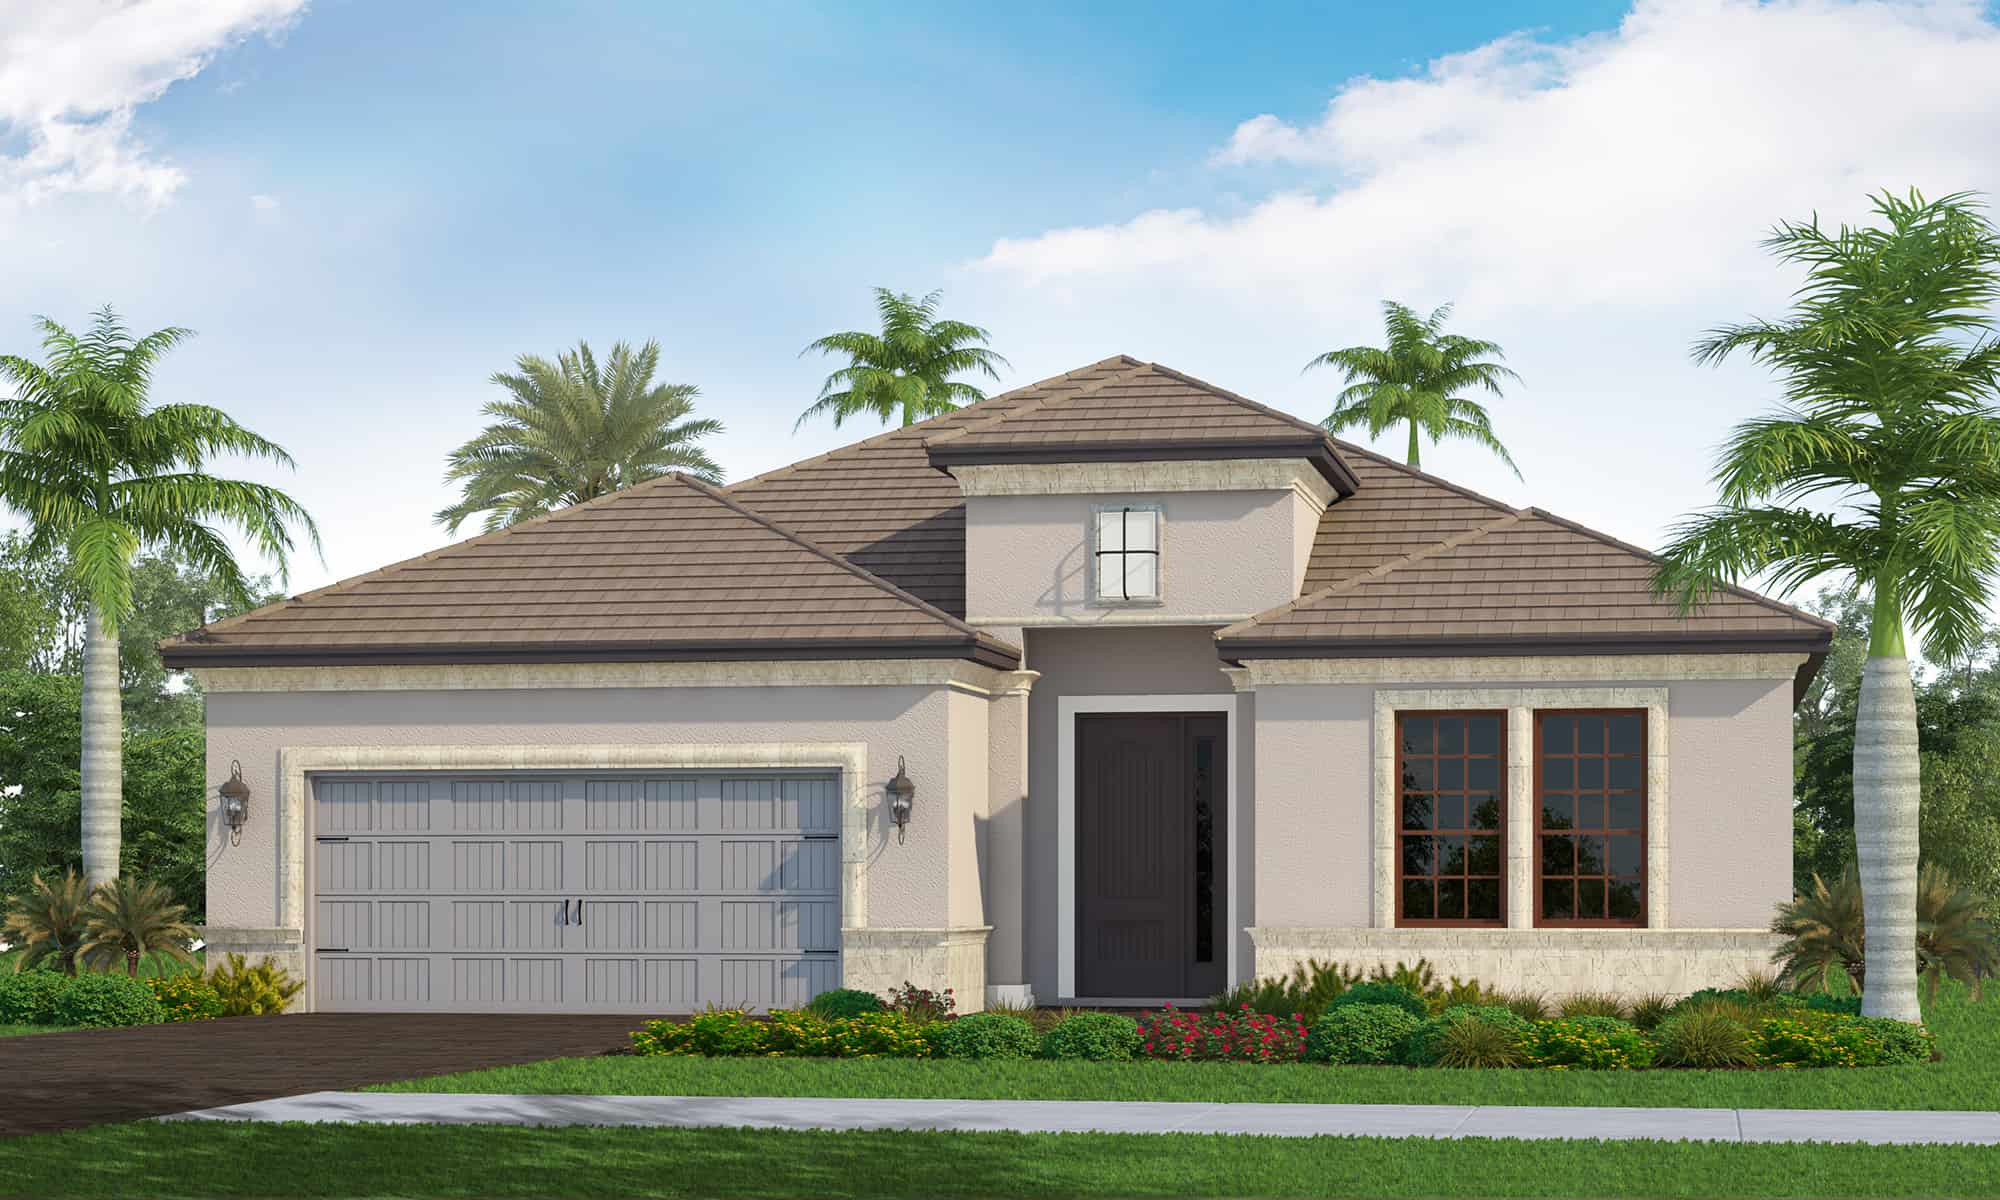 Exterior rendering of Endless Summer NealLand single-family home by Neal Communities